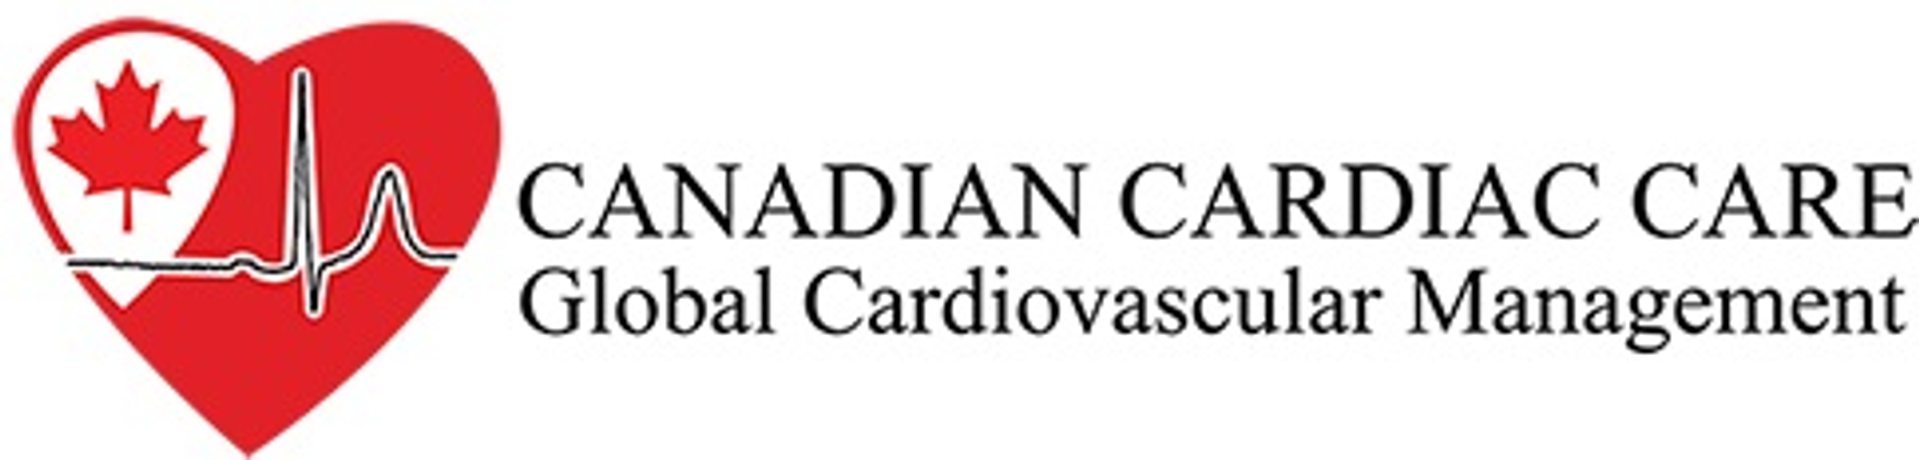 Cardiovascular Care Solutions for Physician - Medical / Health Care